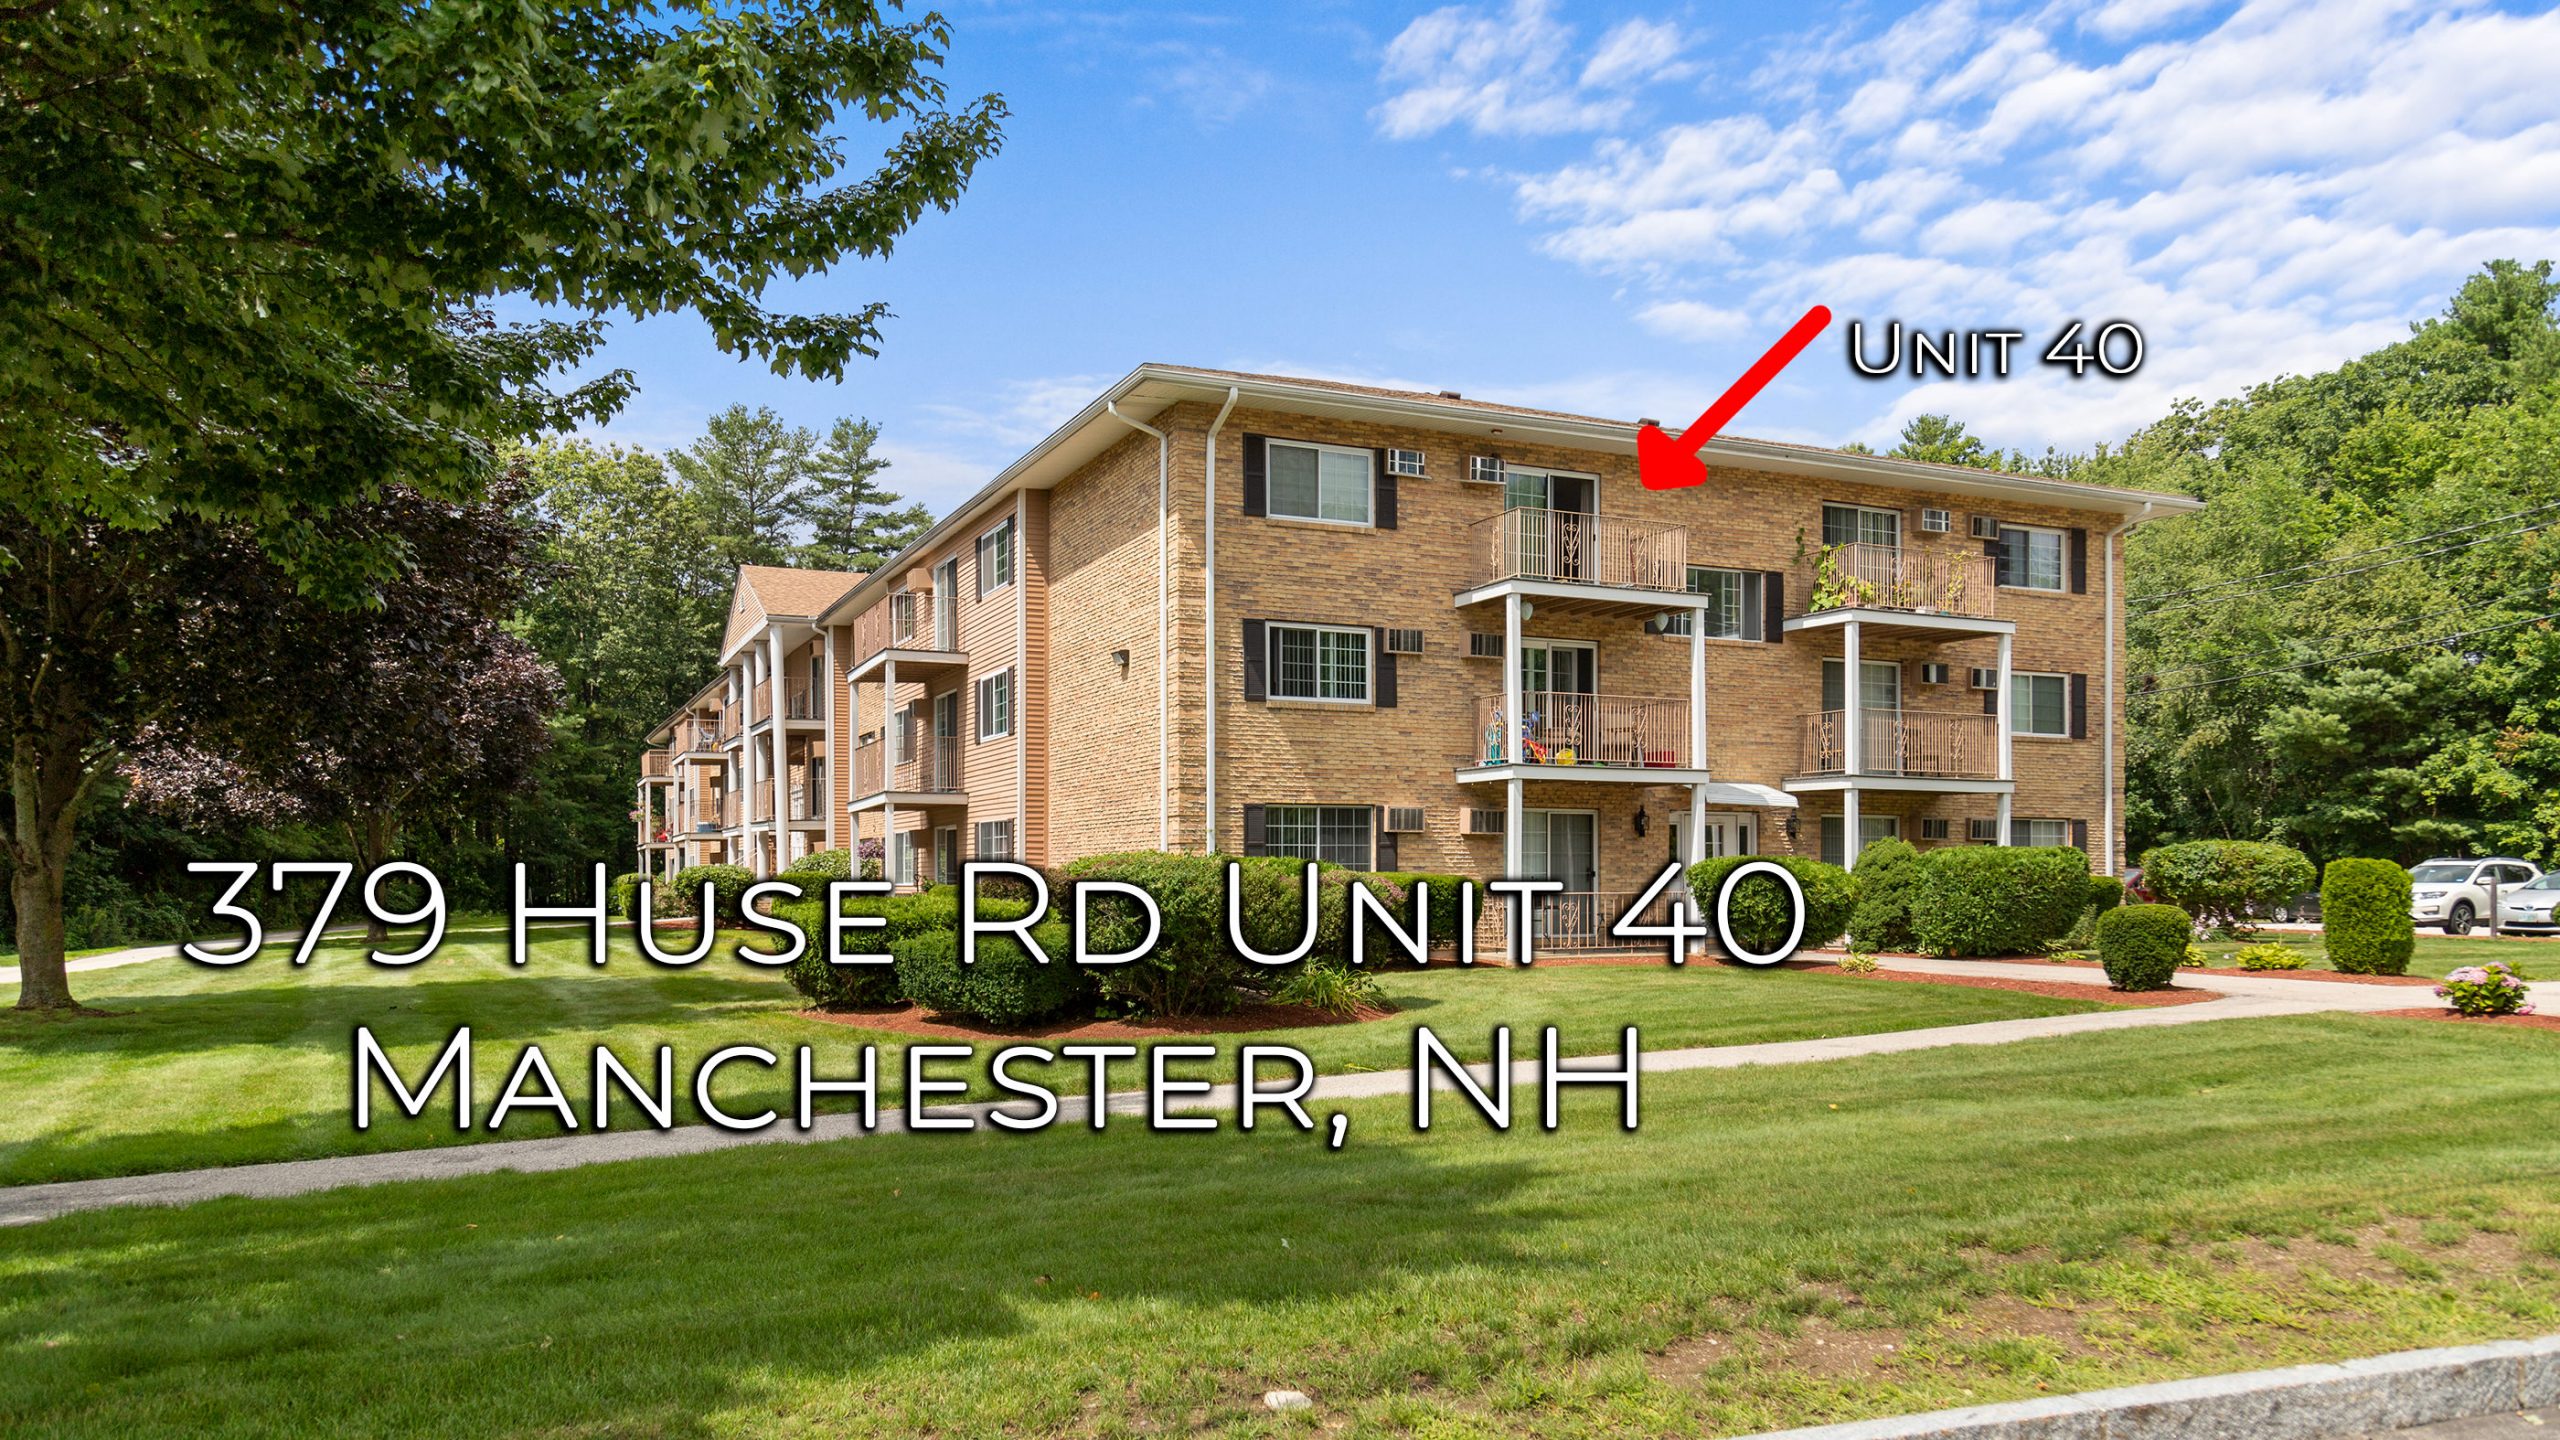 379 Huse Rd Unit 40 Manchester NH 03103